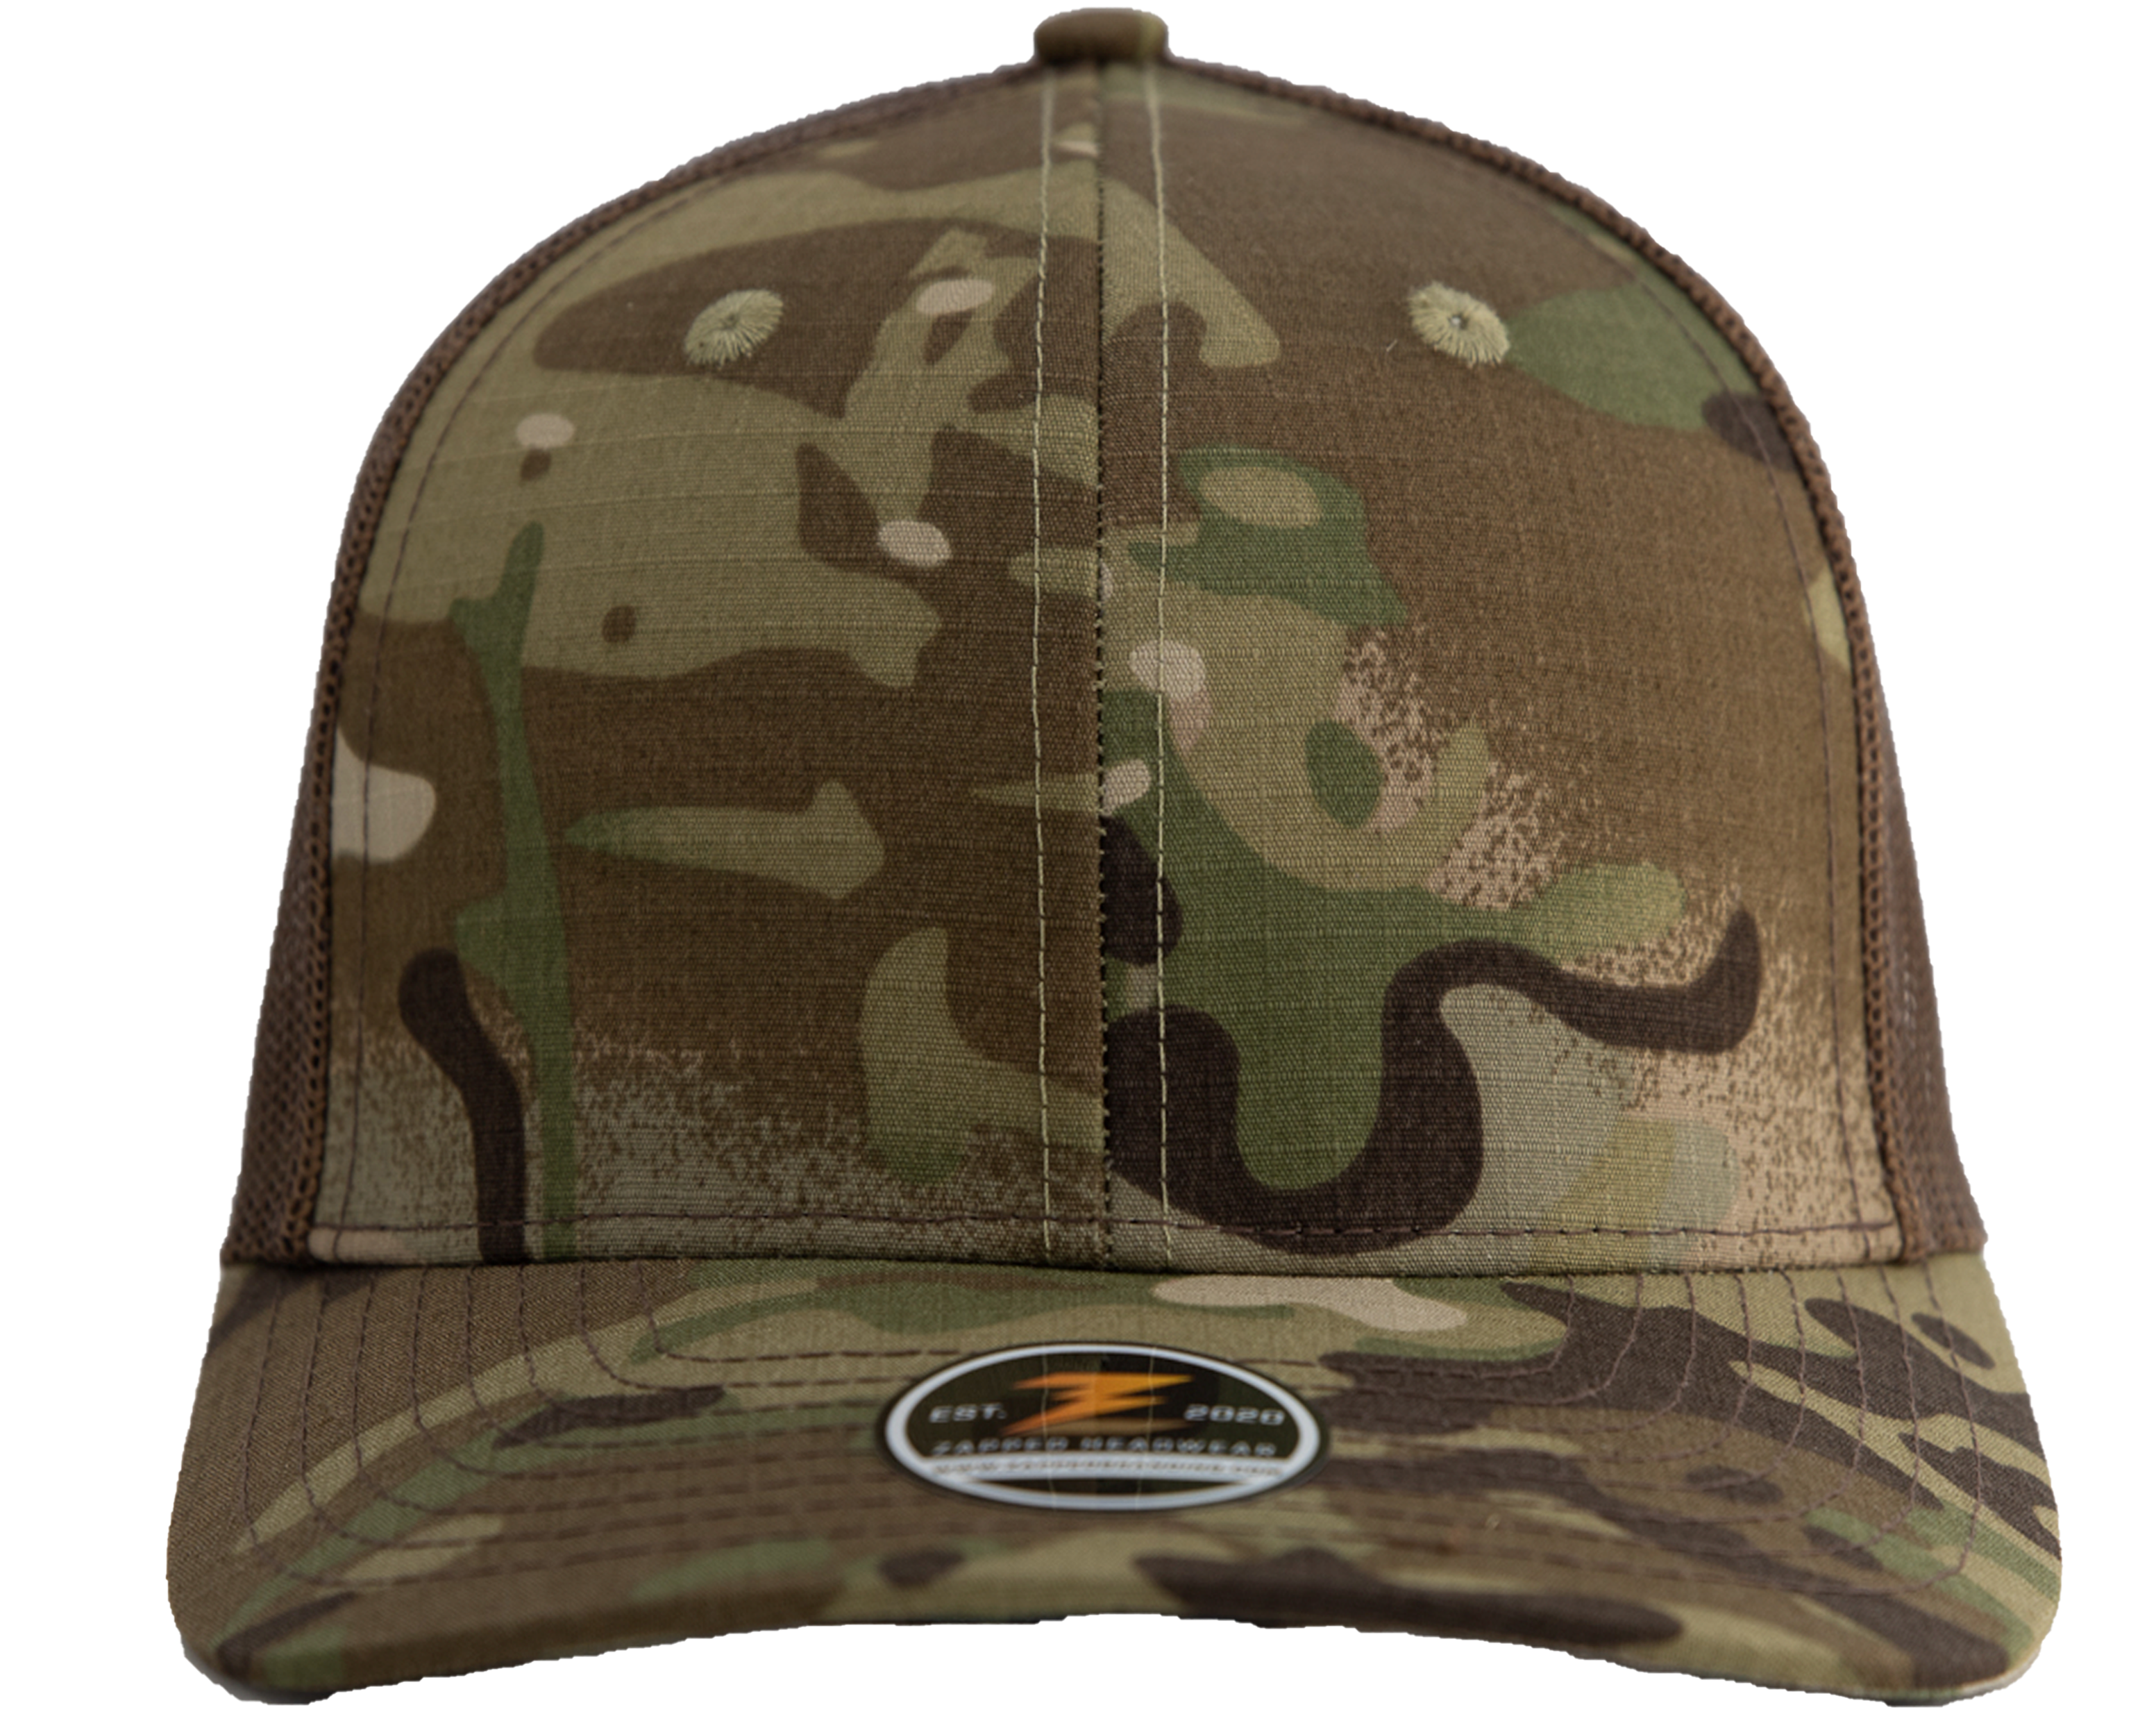 Chocolate Chip & Birch Leather Patch Hat – Sportsman Camo Covers